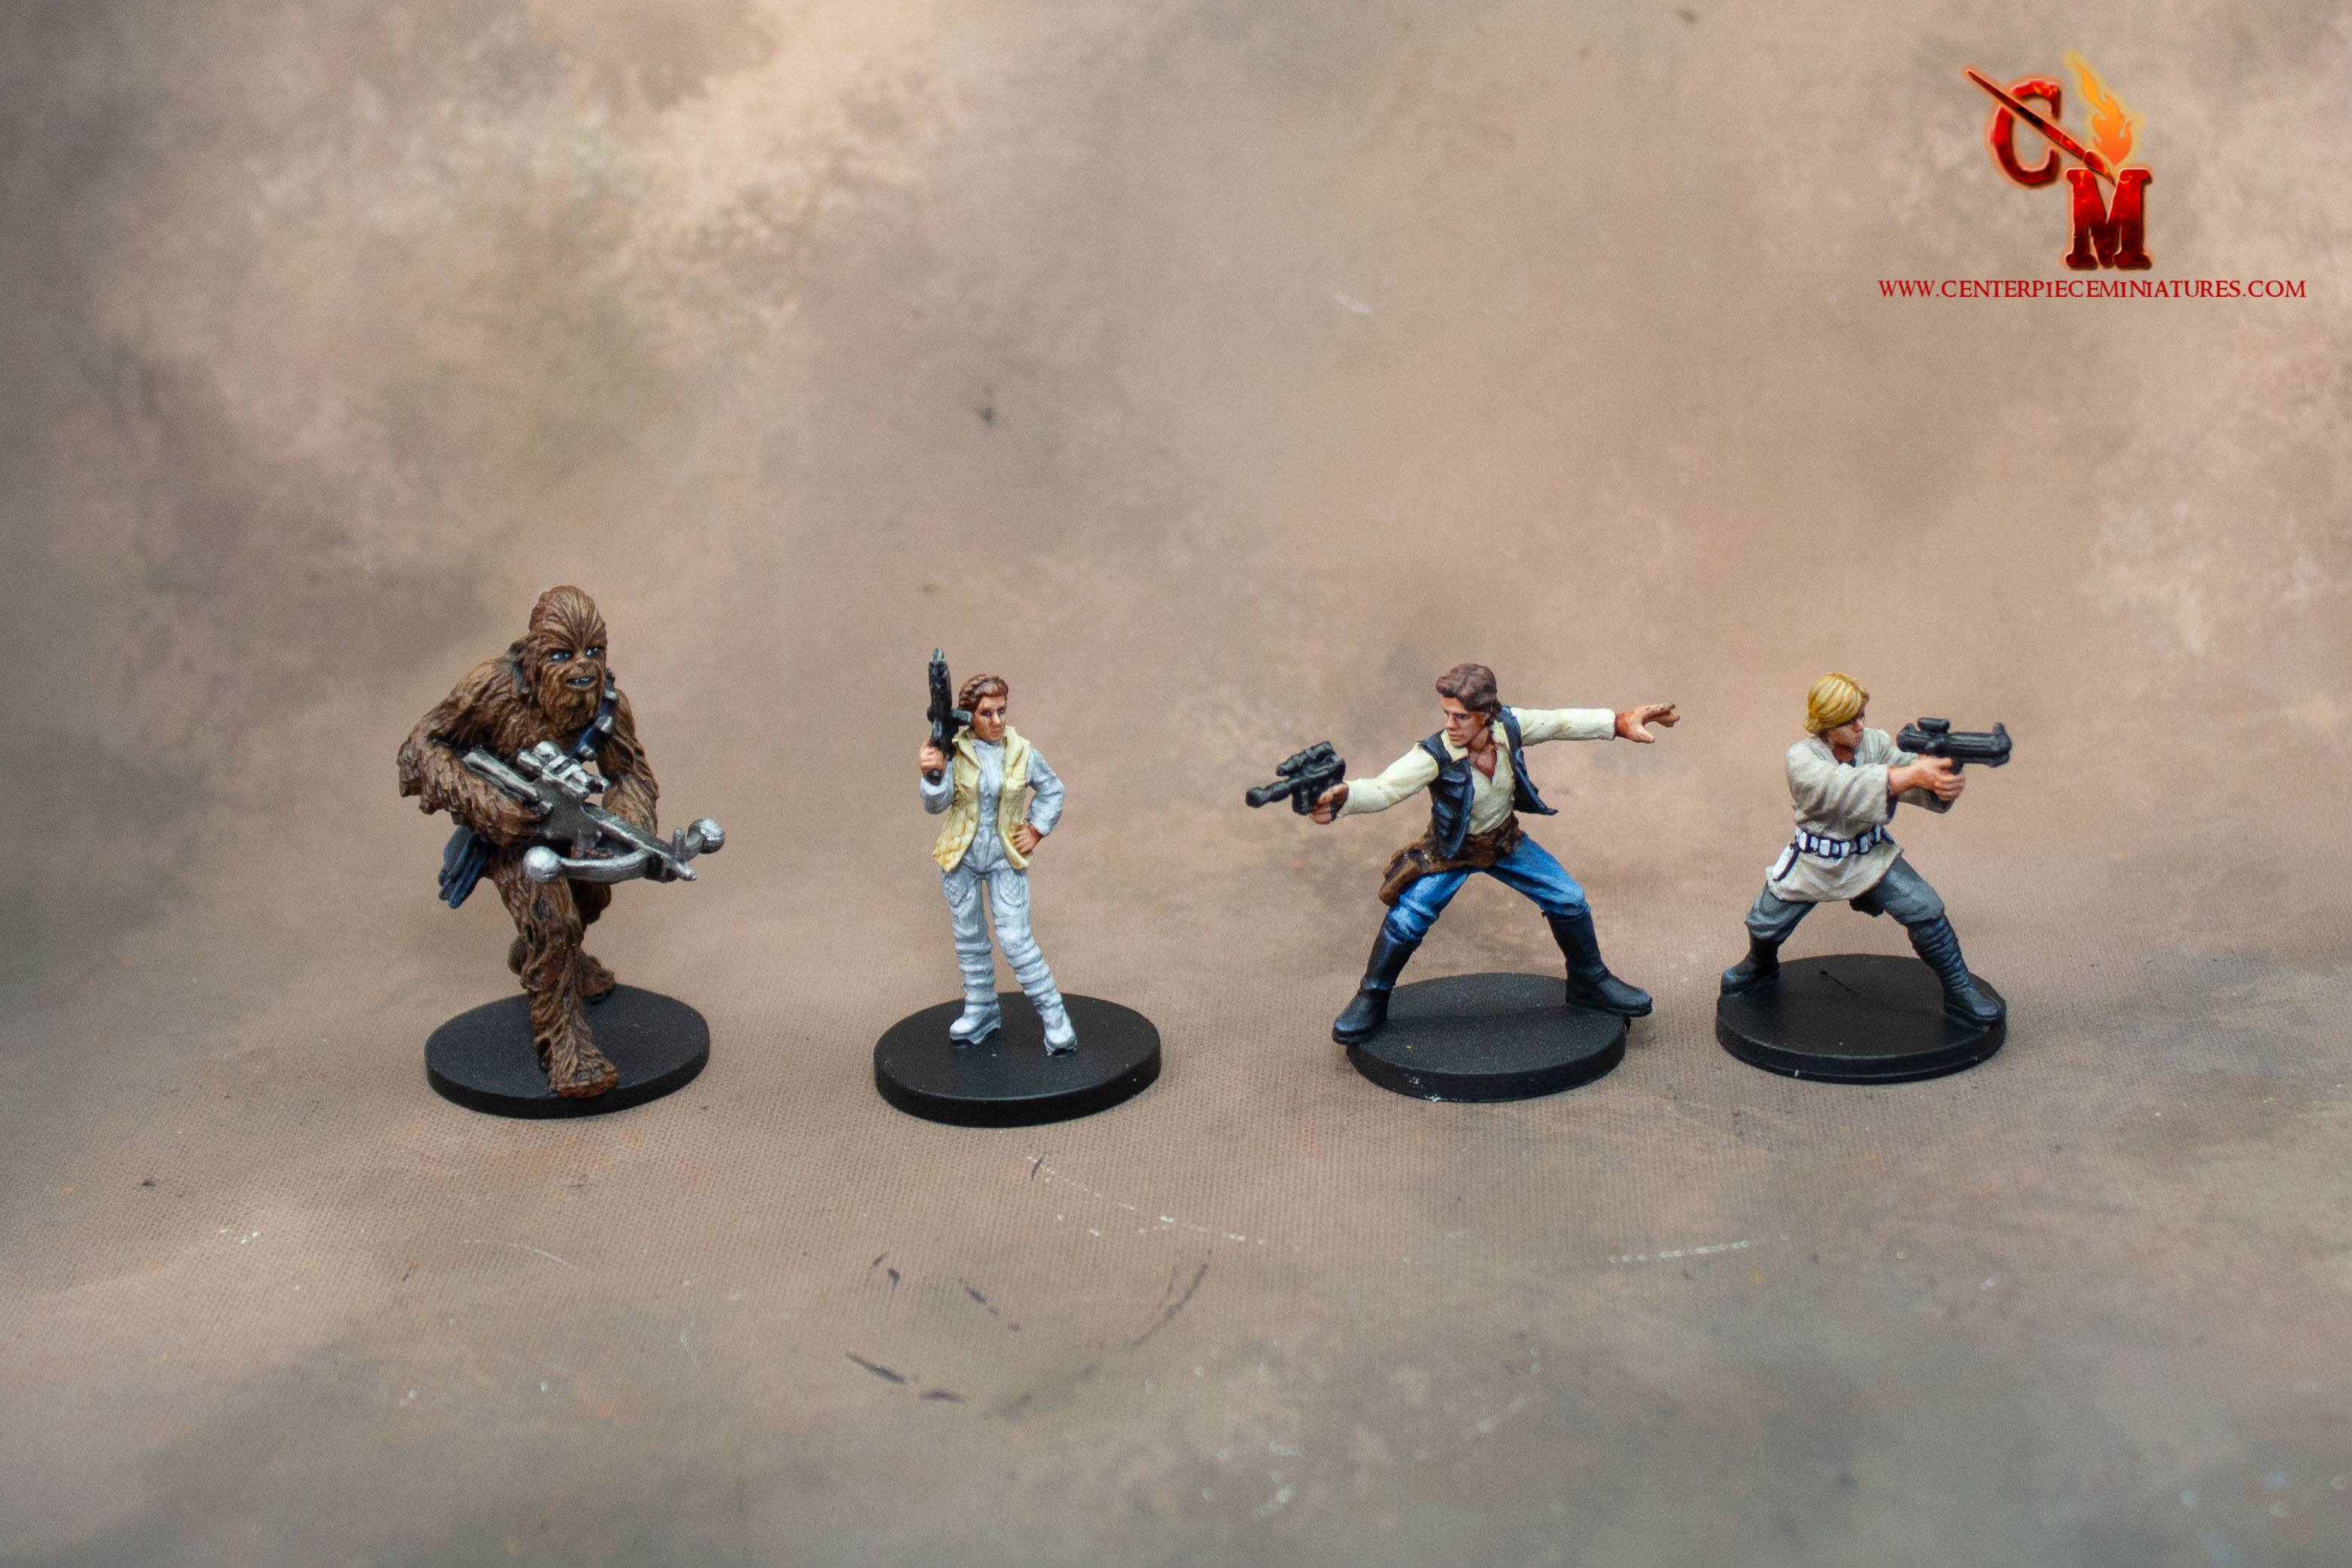 Single Star Wars Imperial Assault Miniatures Game Components Unpainted Figures 